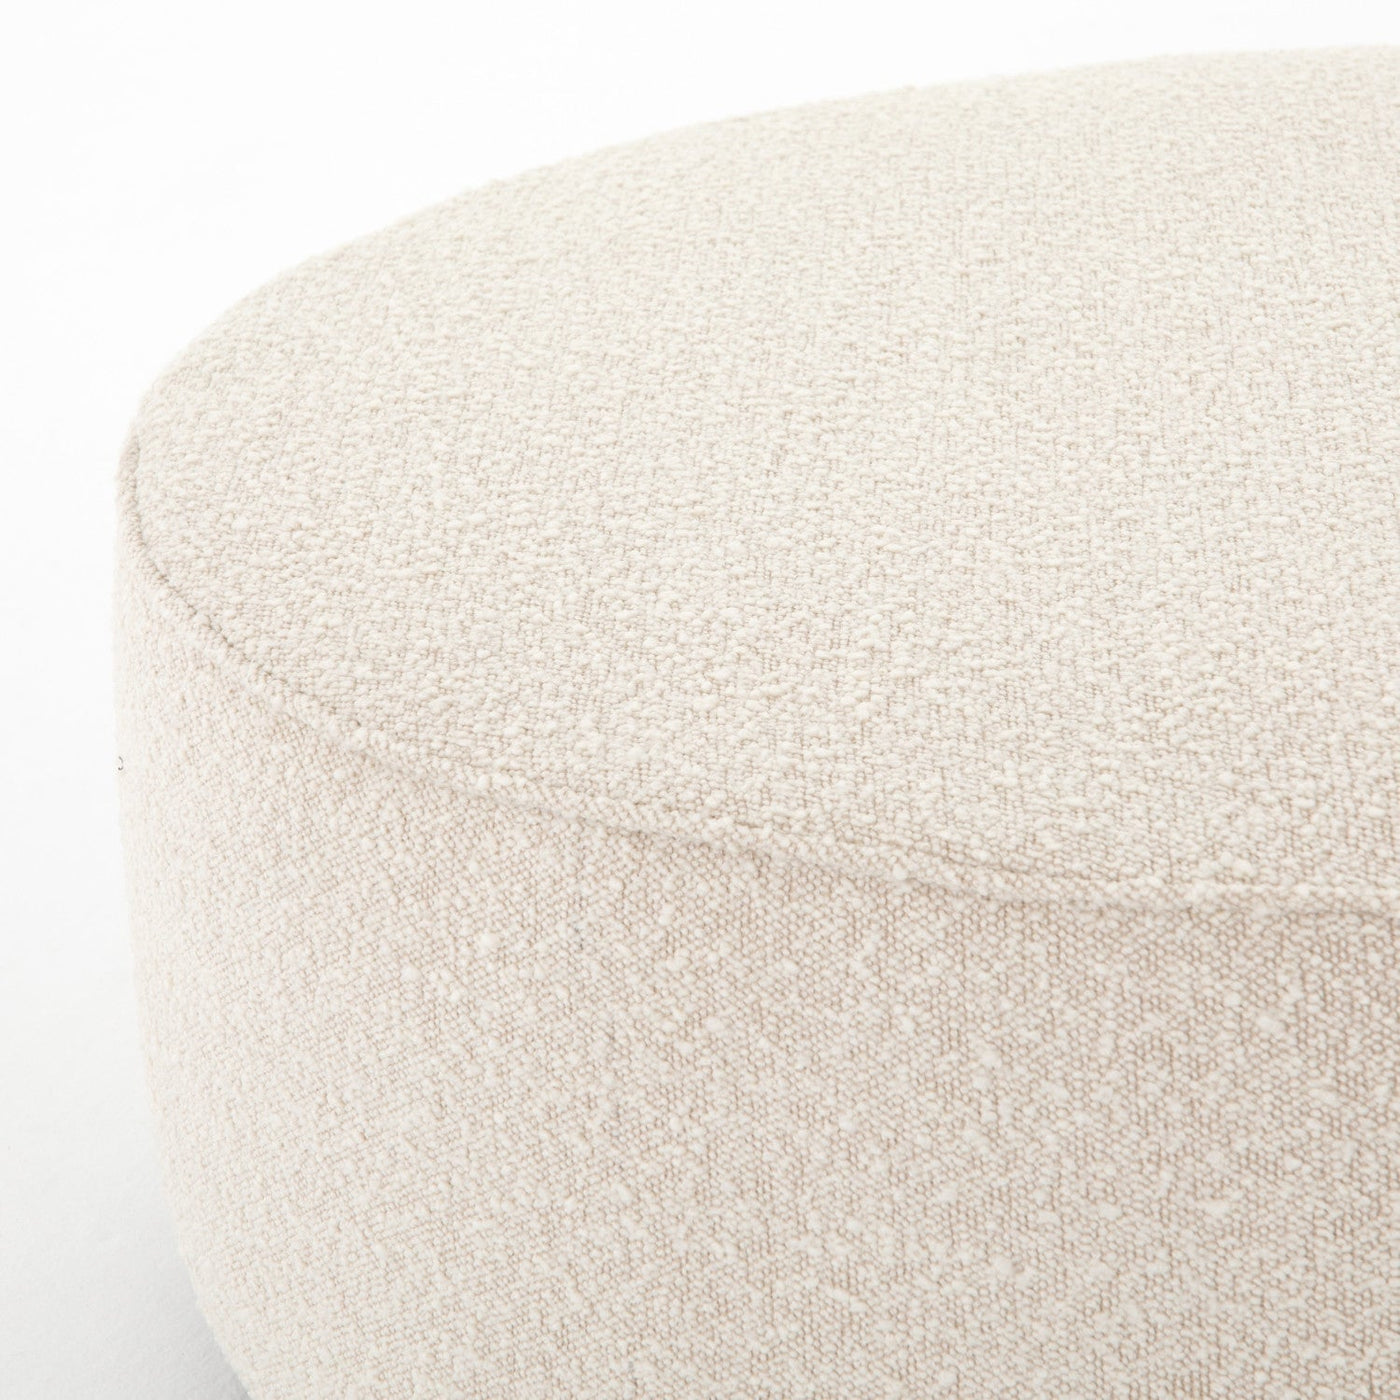 SINCLAIR LARGE ROUND OTTOMAN,KNOLL NATURAL